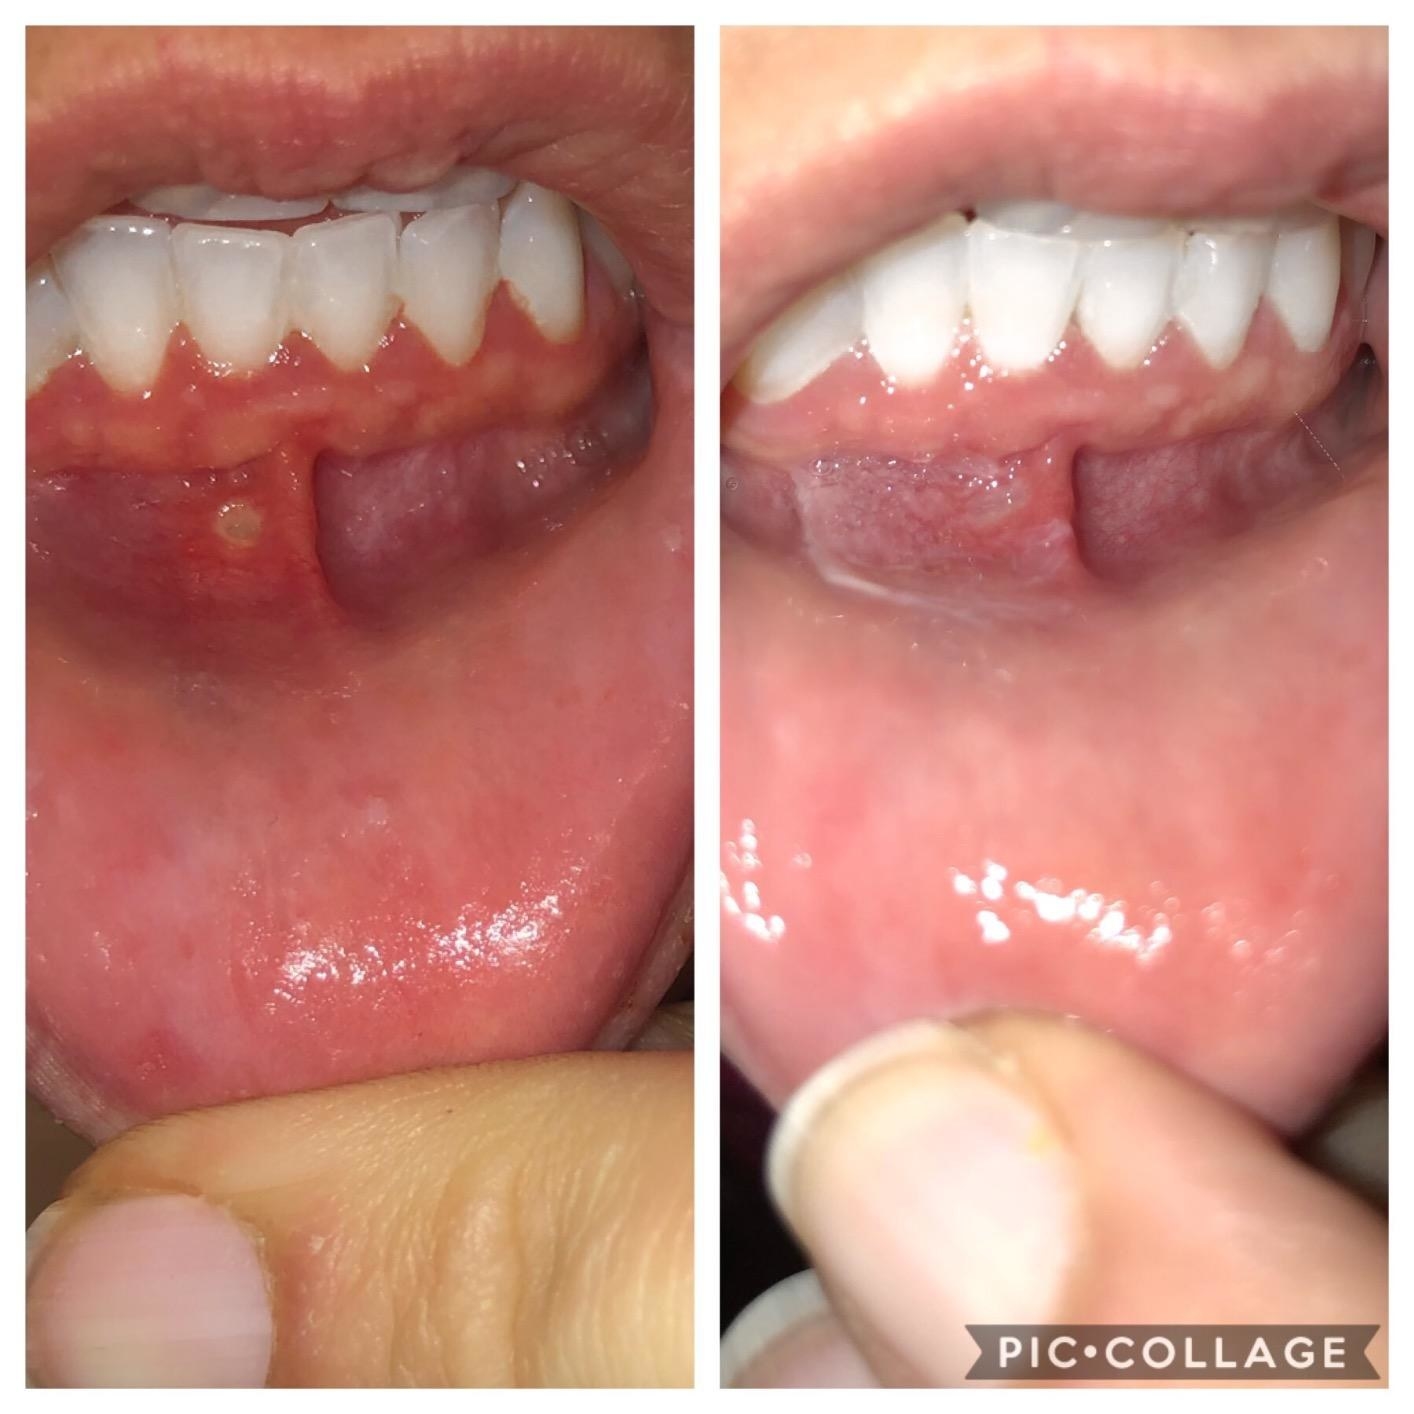 left: reviewer shoes canker sore on gum right&quot; canker sore is almost entirely gone 